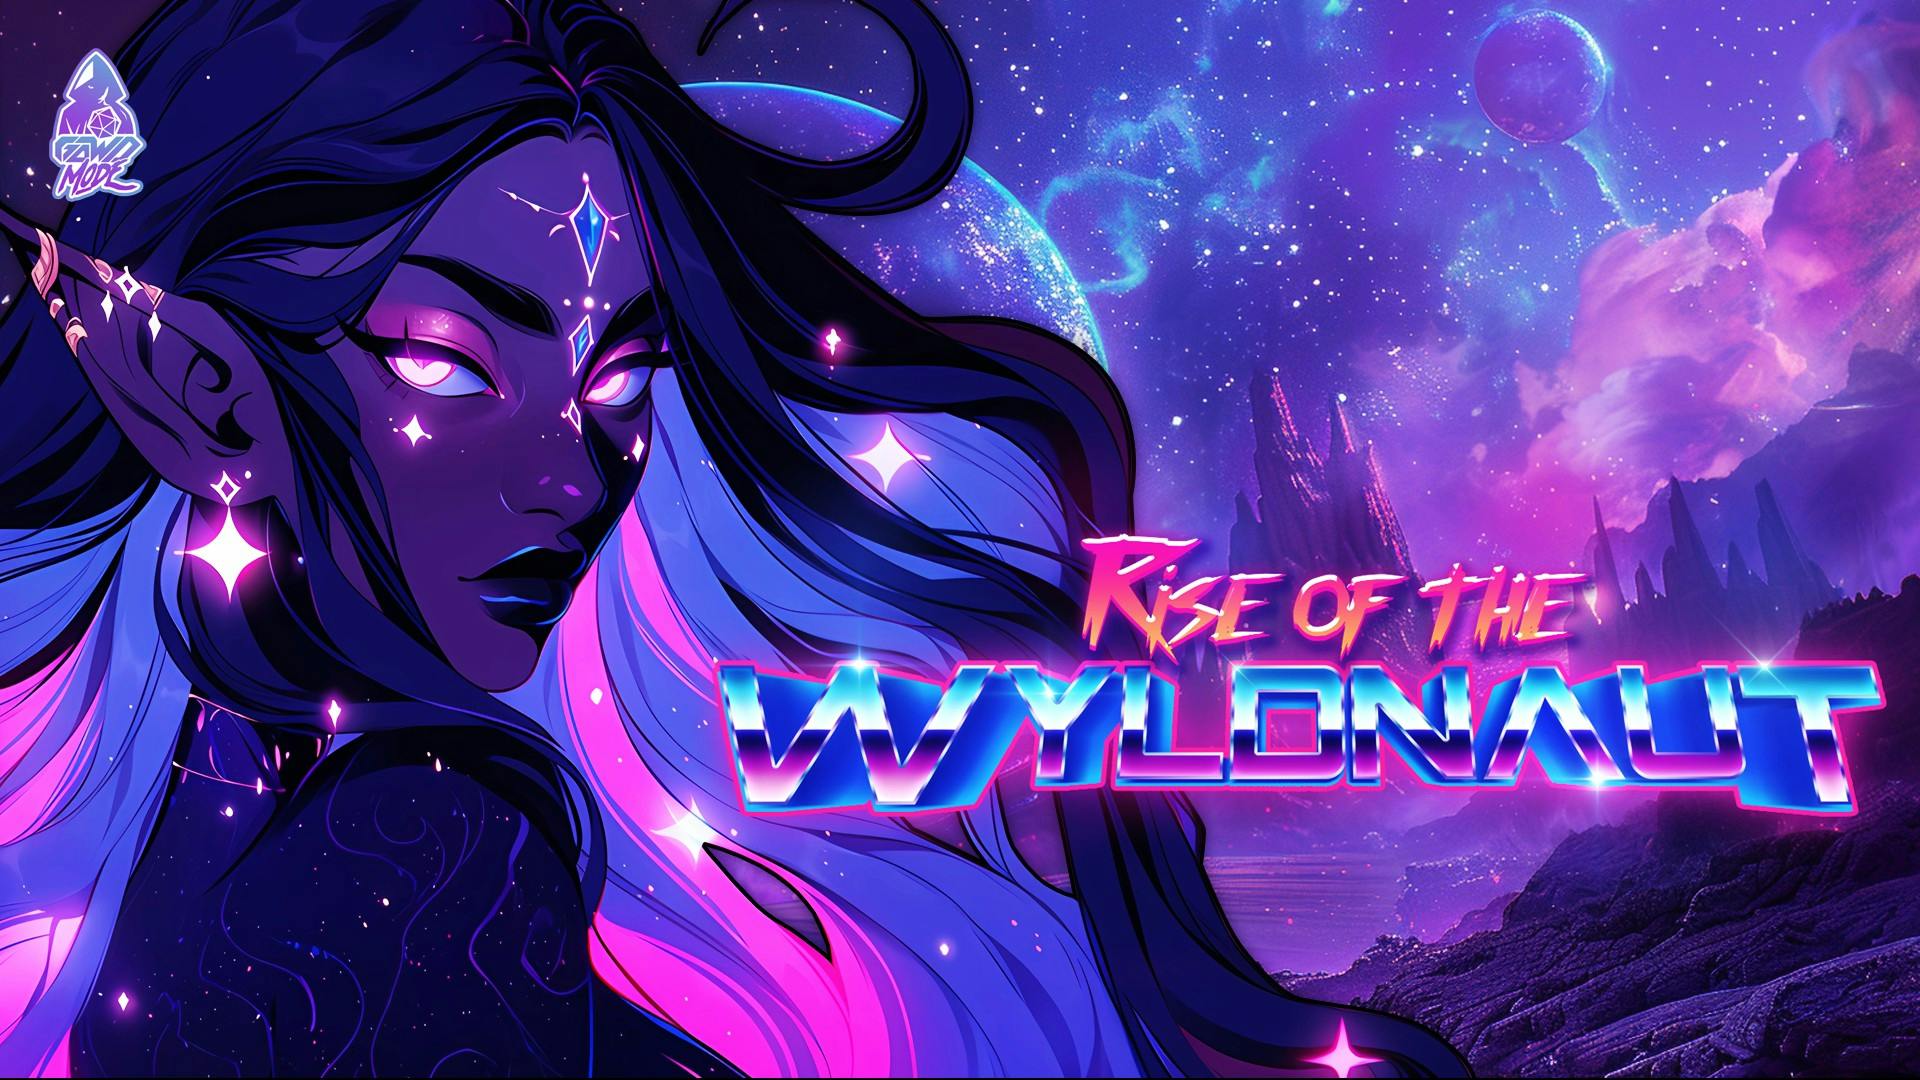 Rise of the Wyldnaut | Homebrew Spelljammer Campaign ✨ [FIRST SESSION HALF PRICE]